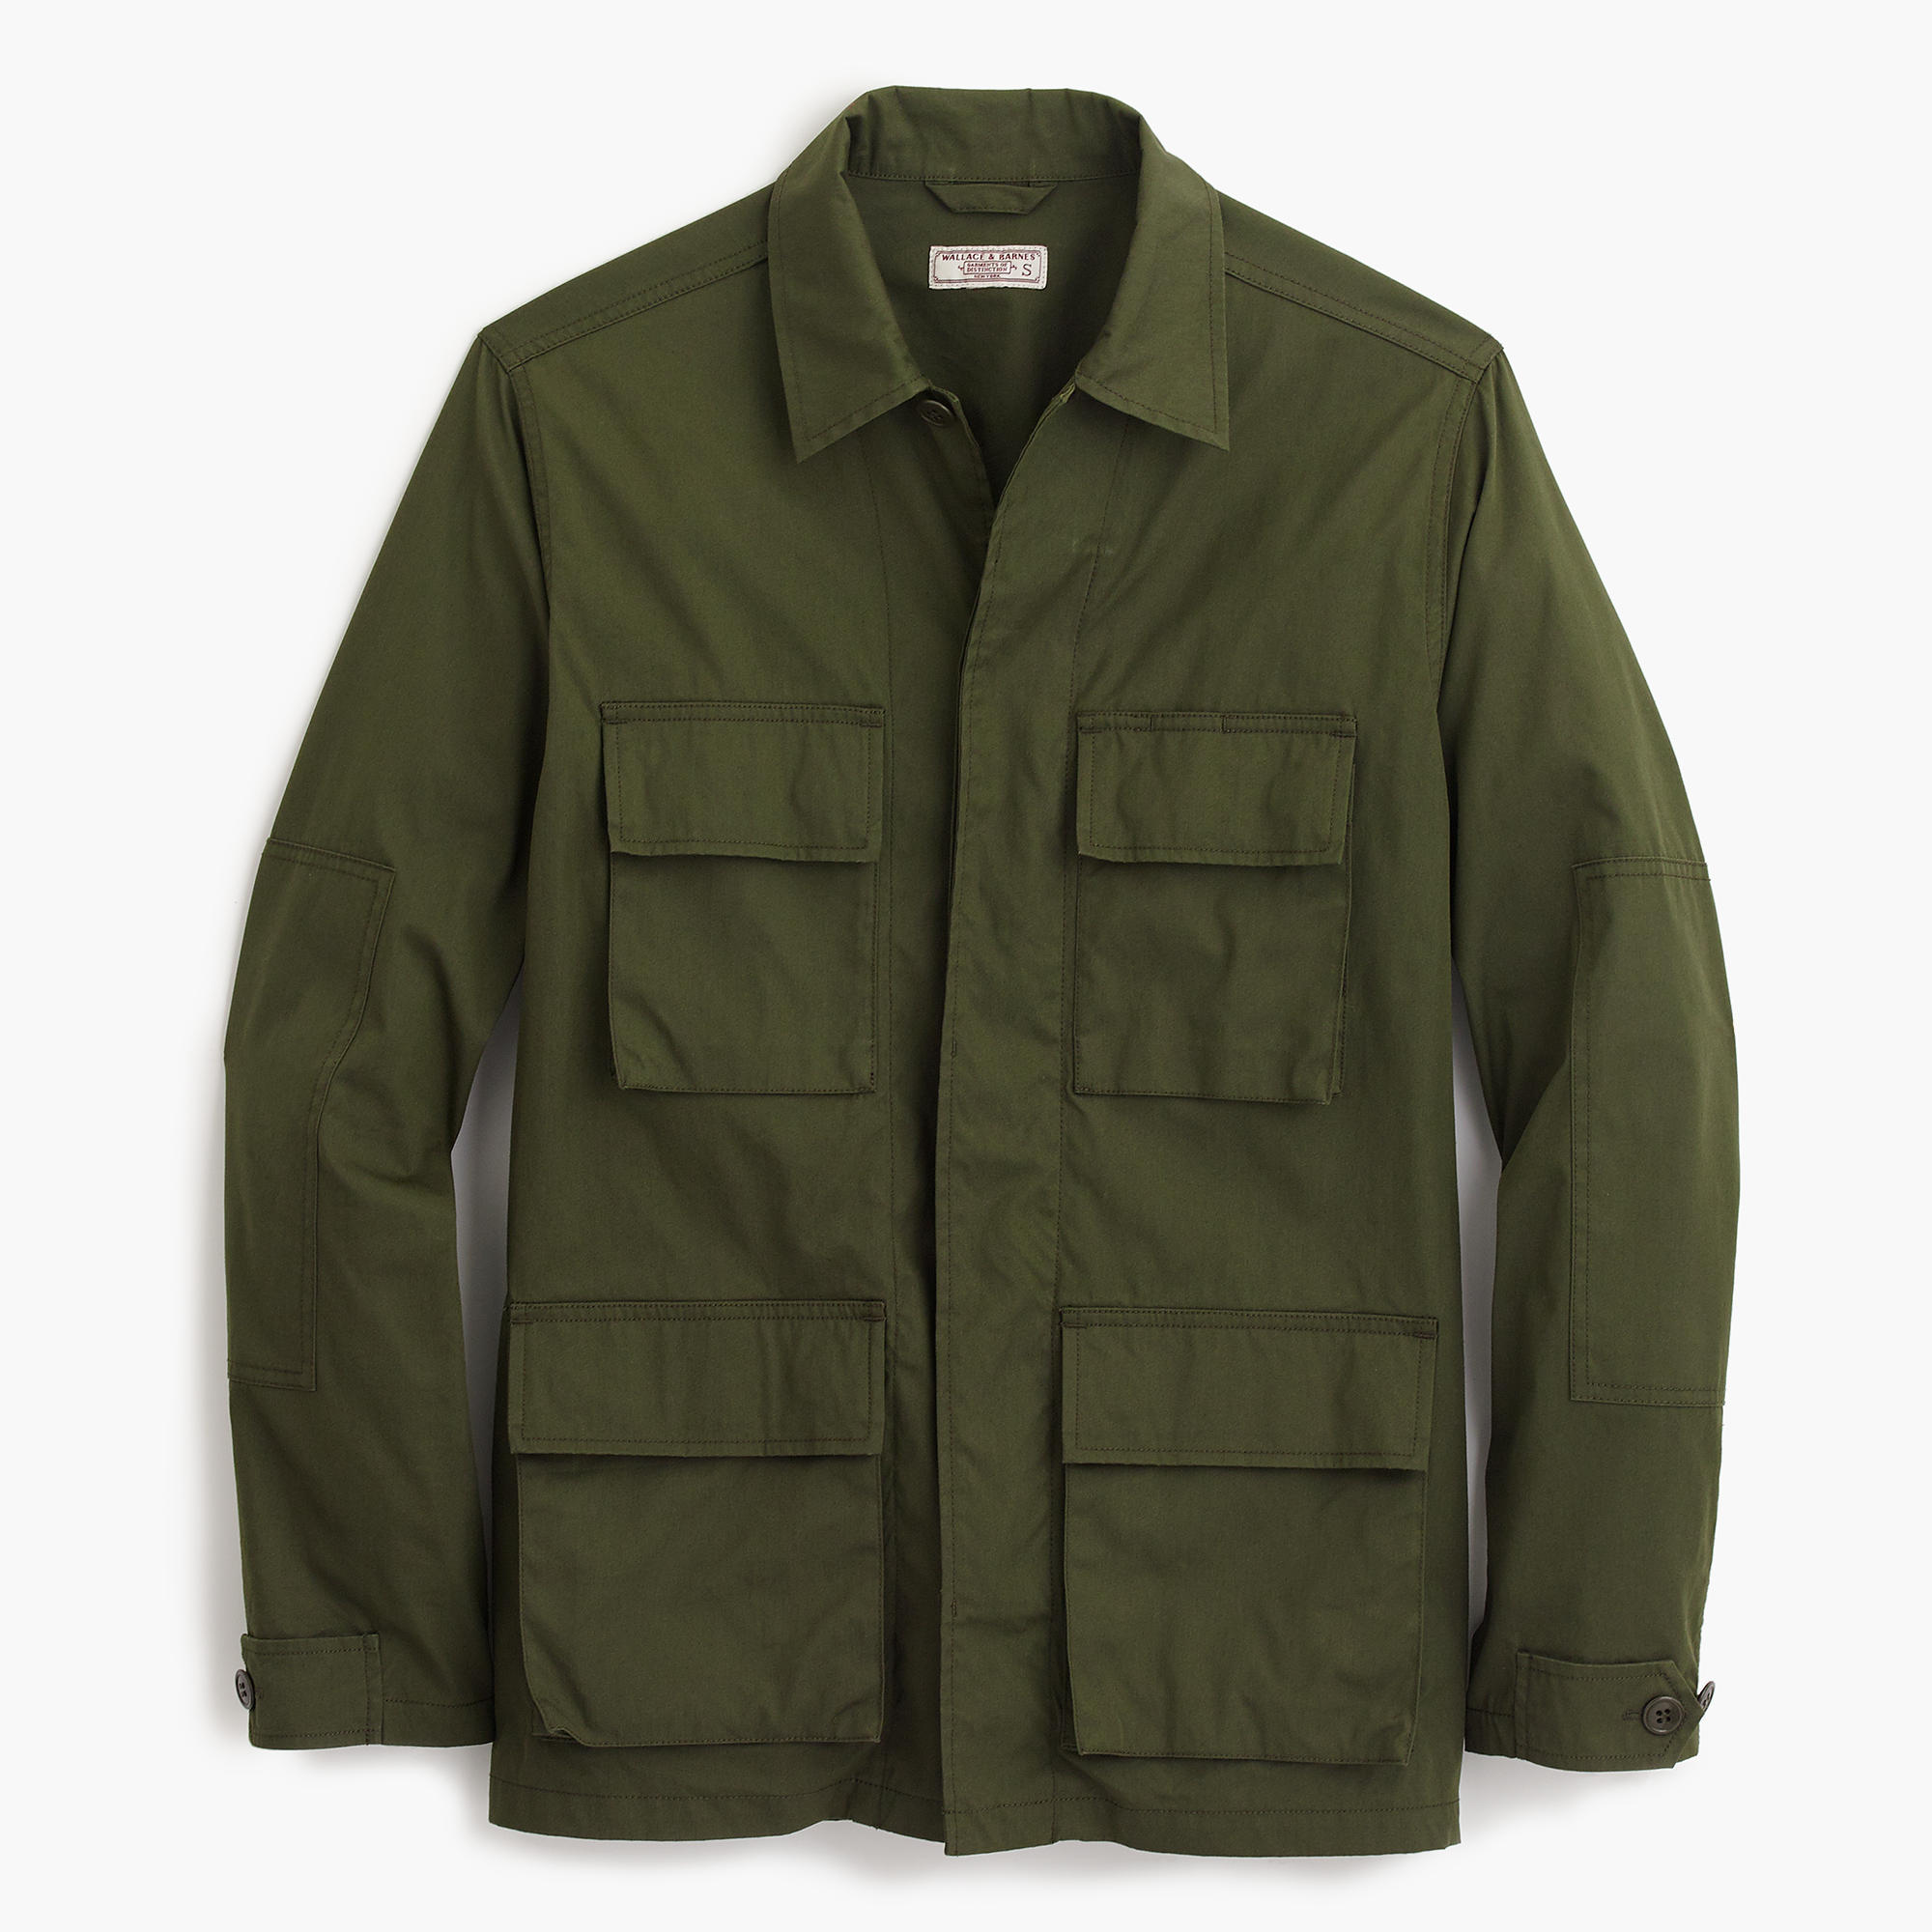 How to Wear a Field Jacket for Spring - Tailor & Barber